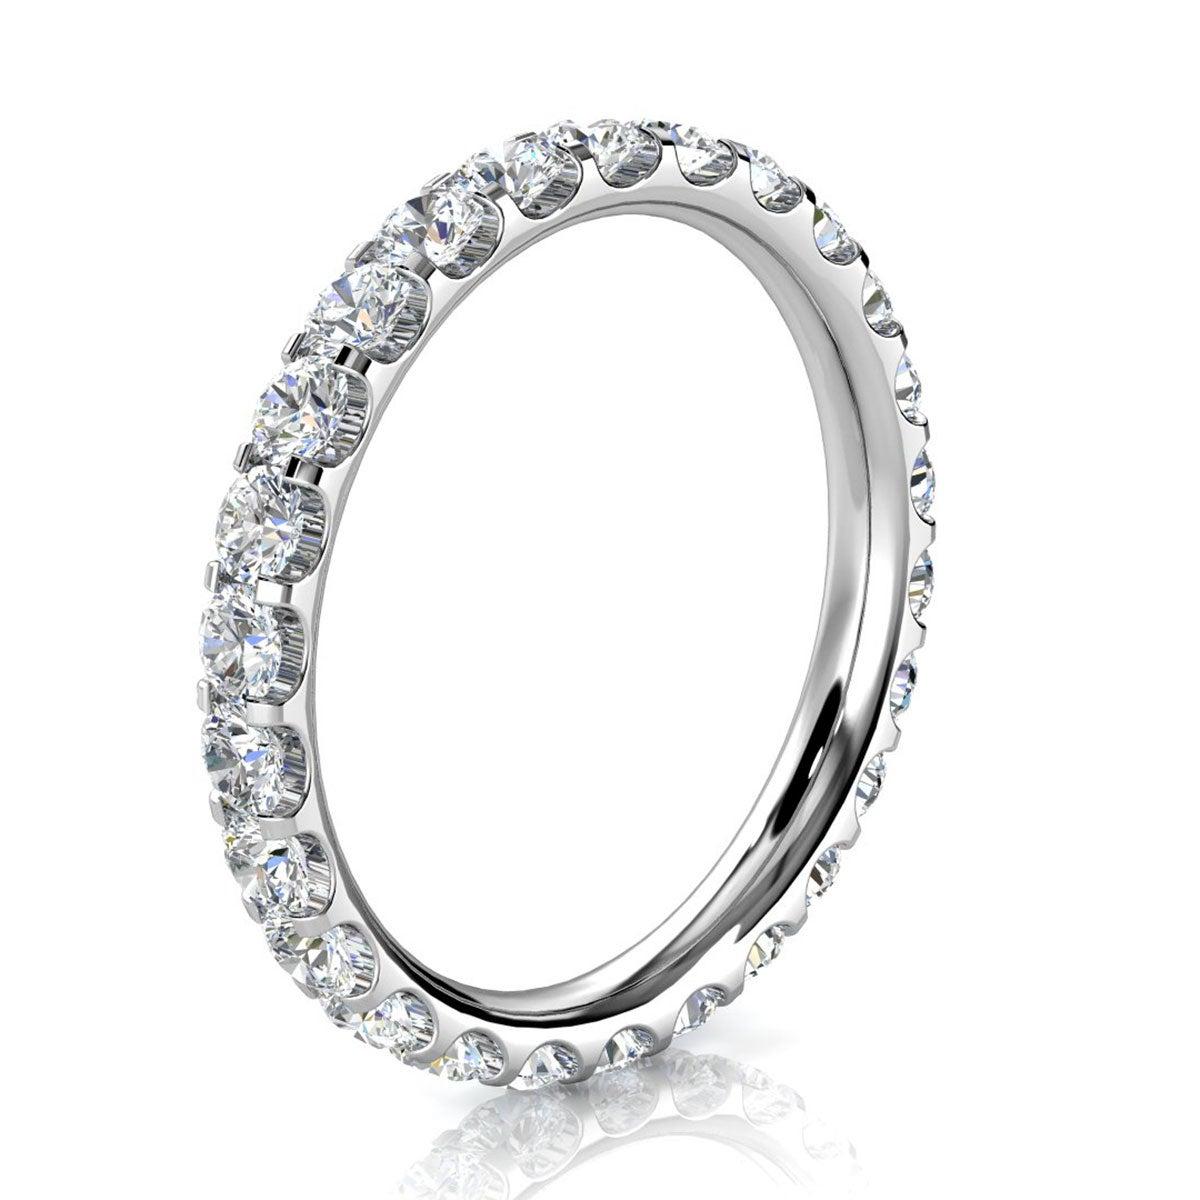 For Sale:  18k White Gold Viola Eternity Micro-Prong Diamond Ring '1 Ct. Tw' 2